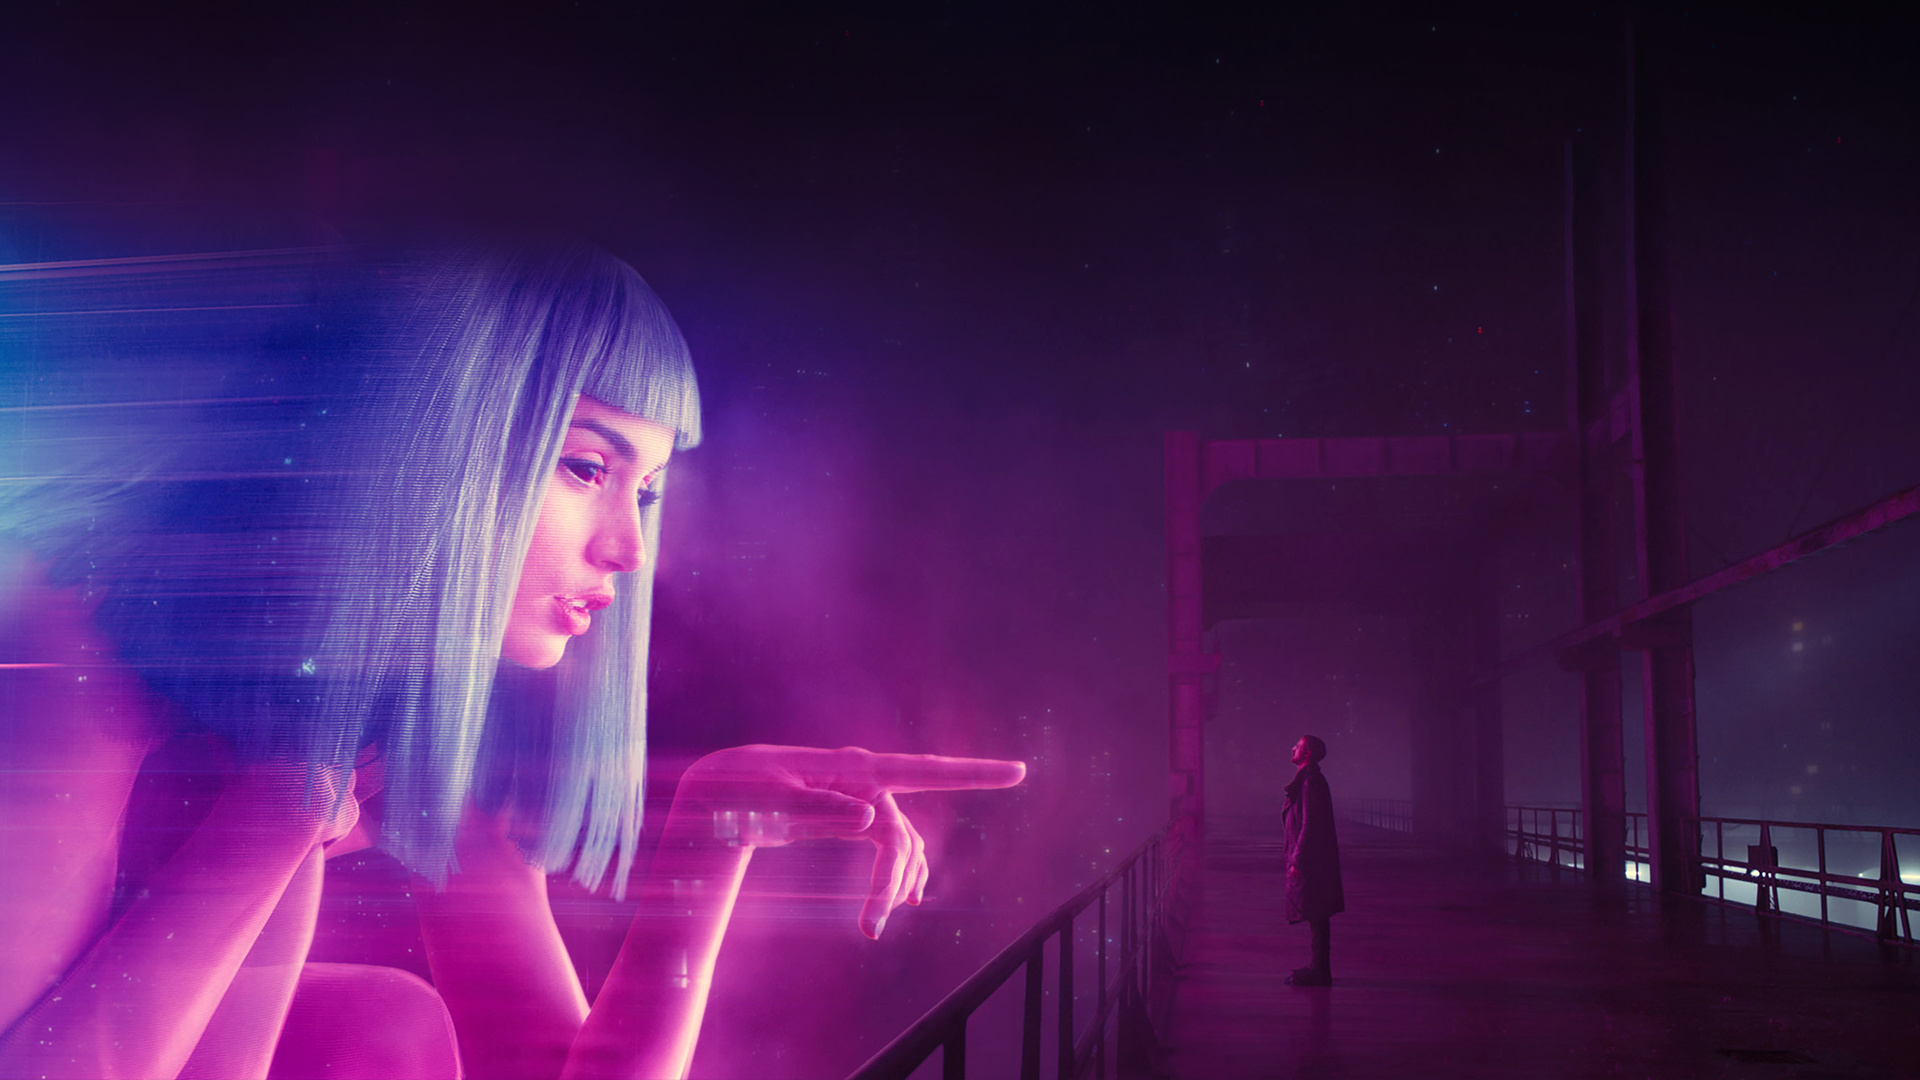 Free Blade Runner 2049 wallpapers, Astonishing visuals, Cutting-edge design, Ultimate fan collection, 1920x1080 Full HD Desktop